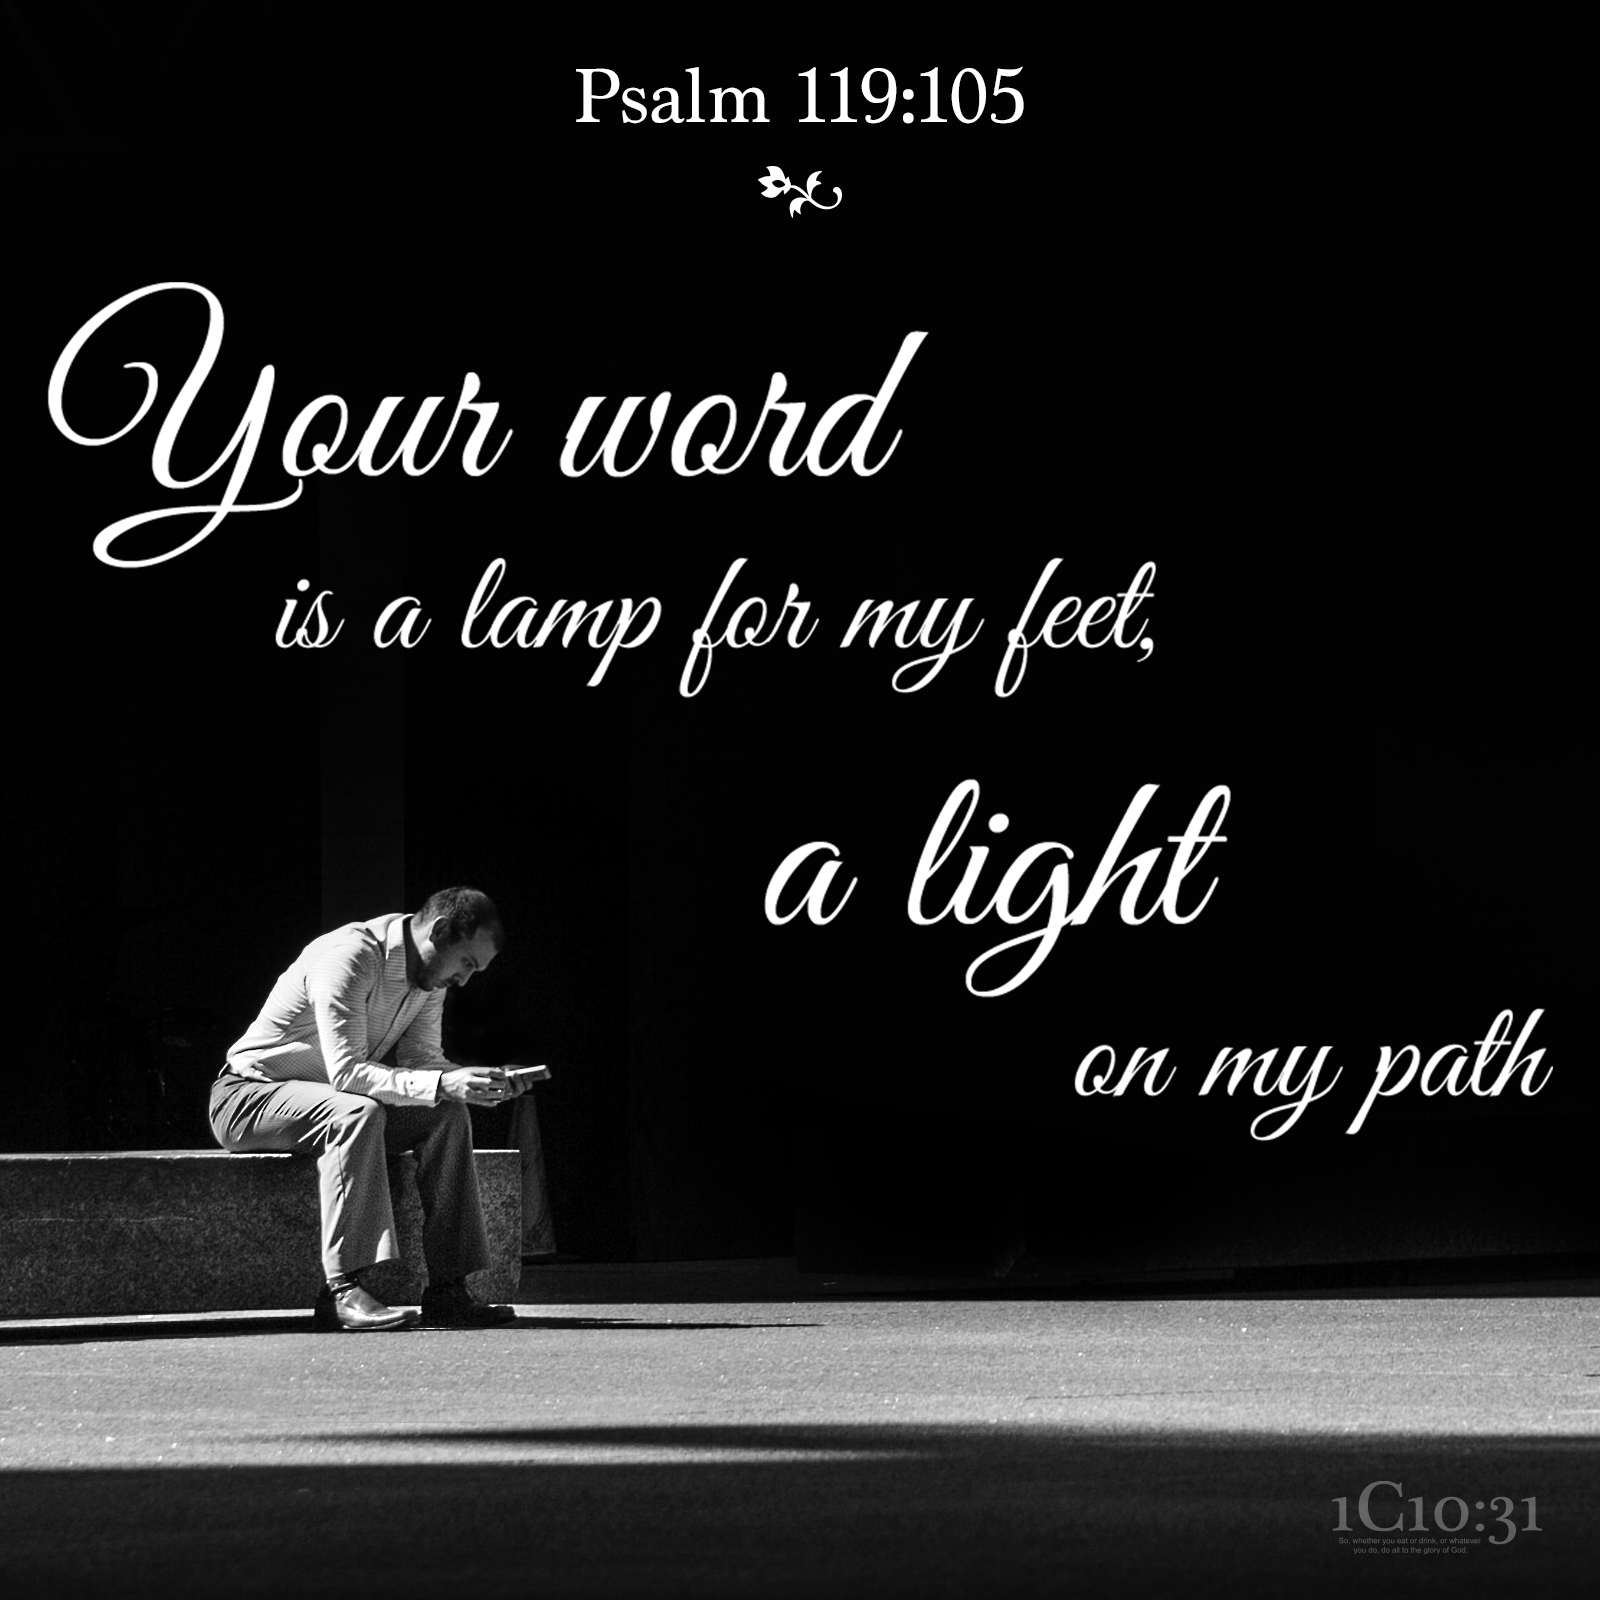 Psalm 119:105 Your word is a lamp for my feet, a light on my path.